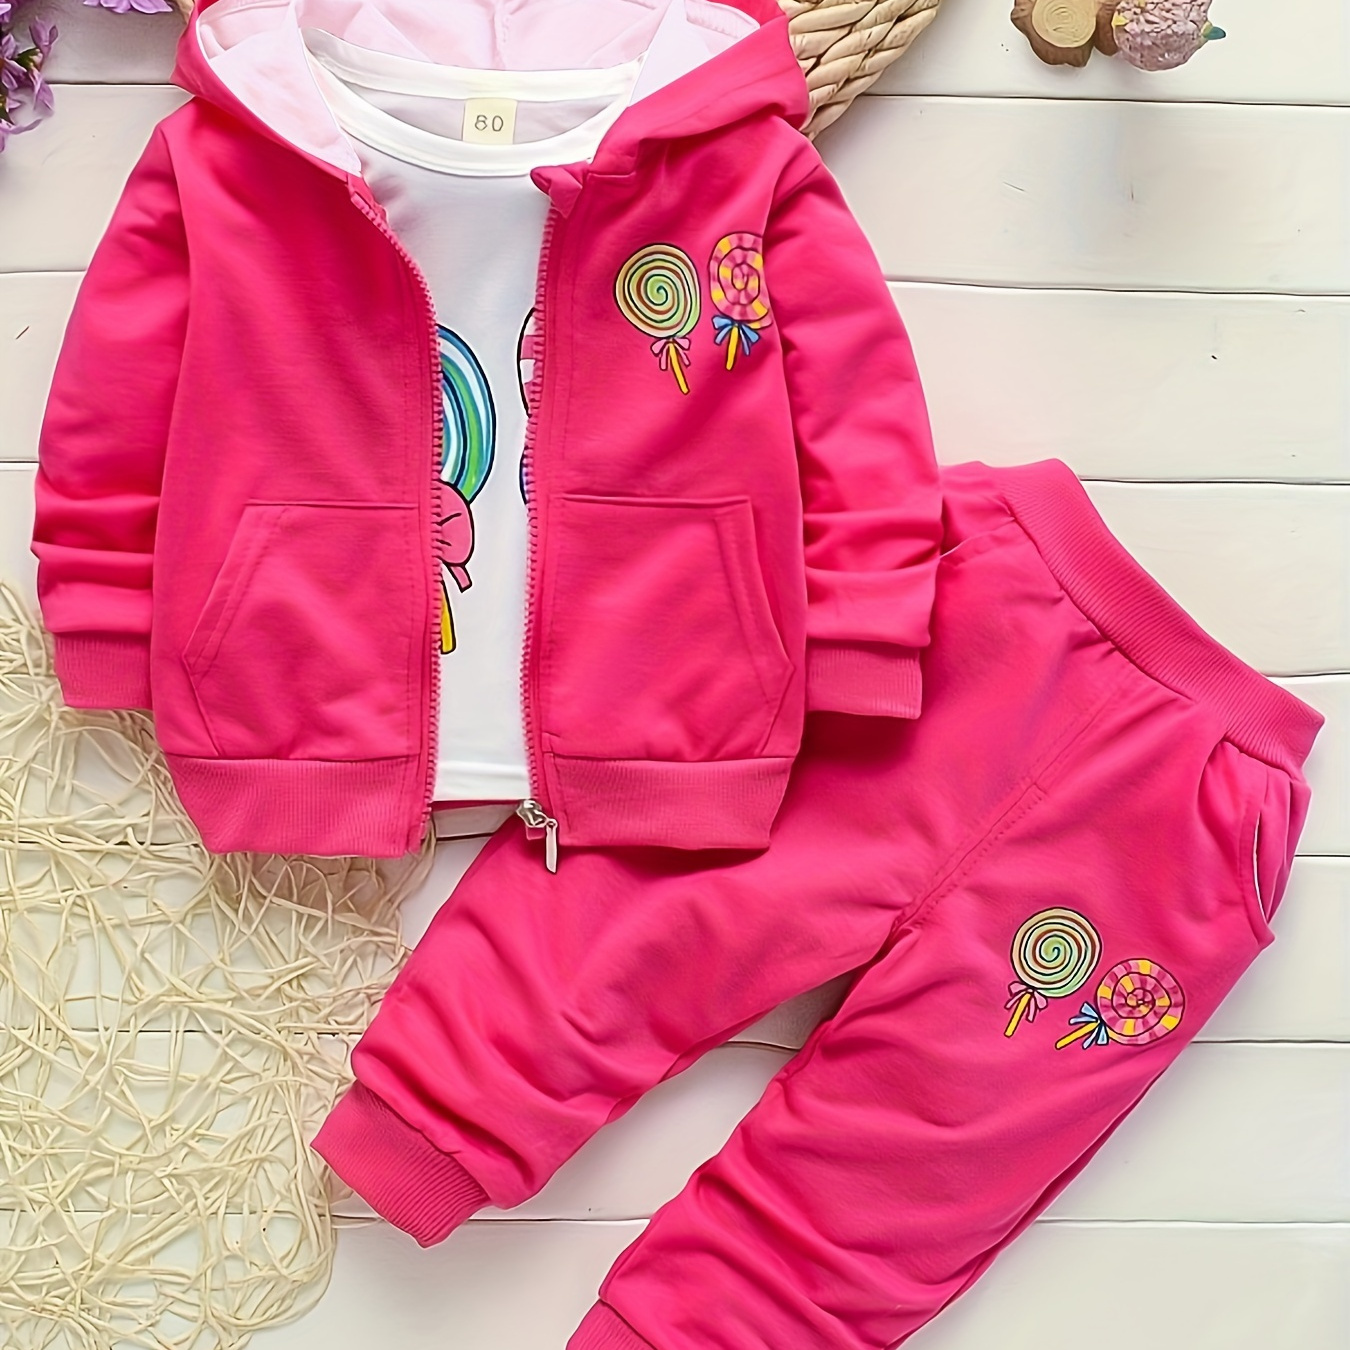 

3pcs Infant & Toddler's Cartoon Lollipop Print Sporty Outfit, Hooded Jacket & Long Sleeve T-shirt & Sweatpants, Baby Girl's Clothes